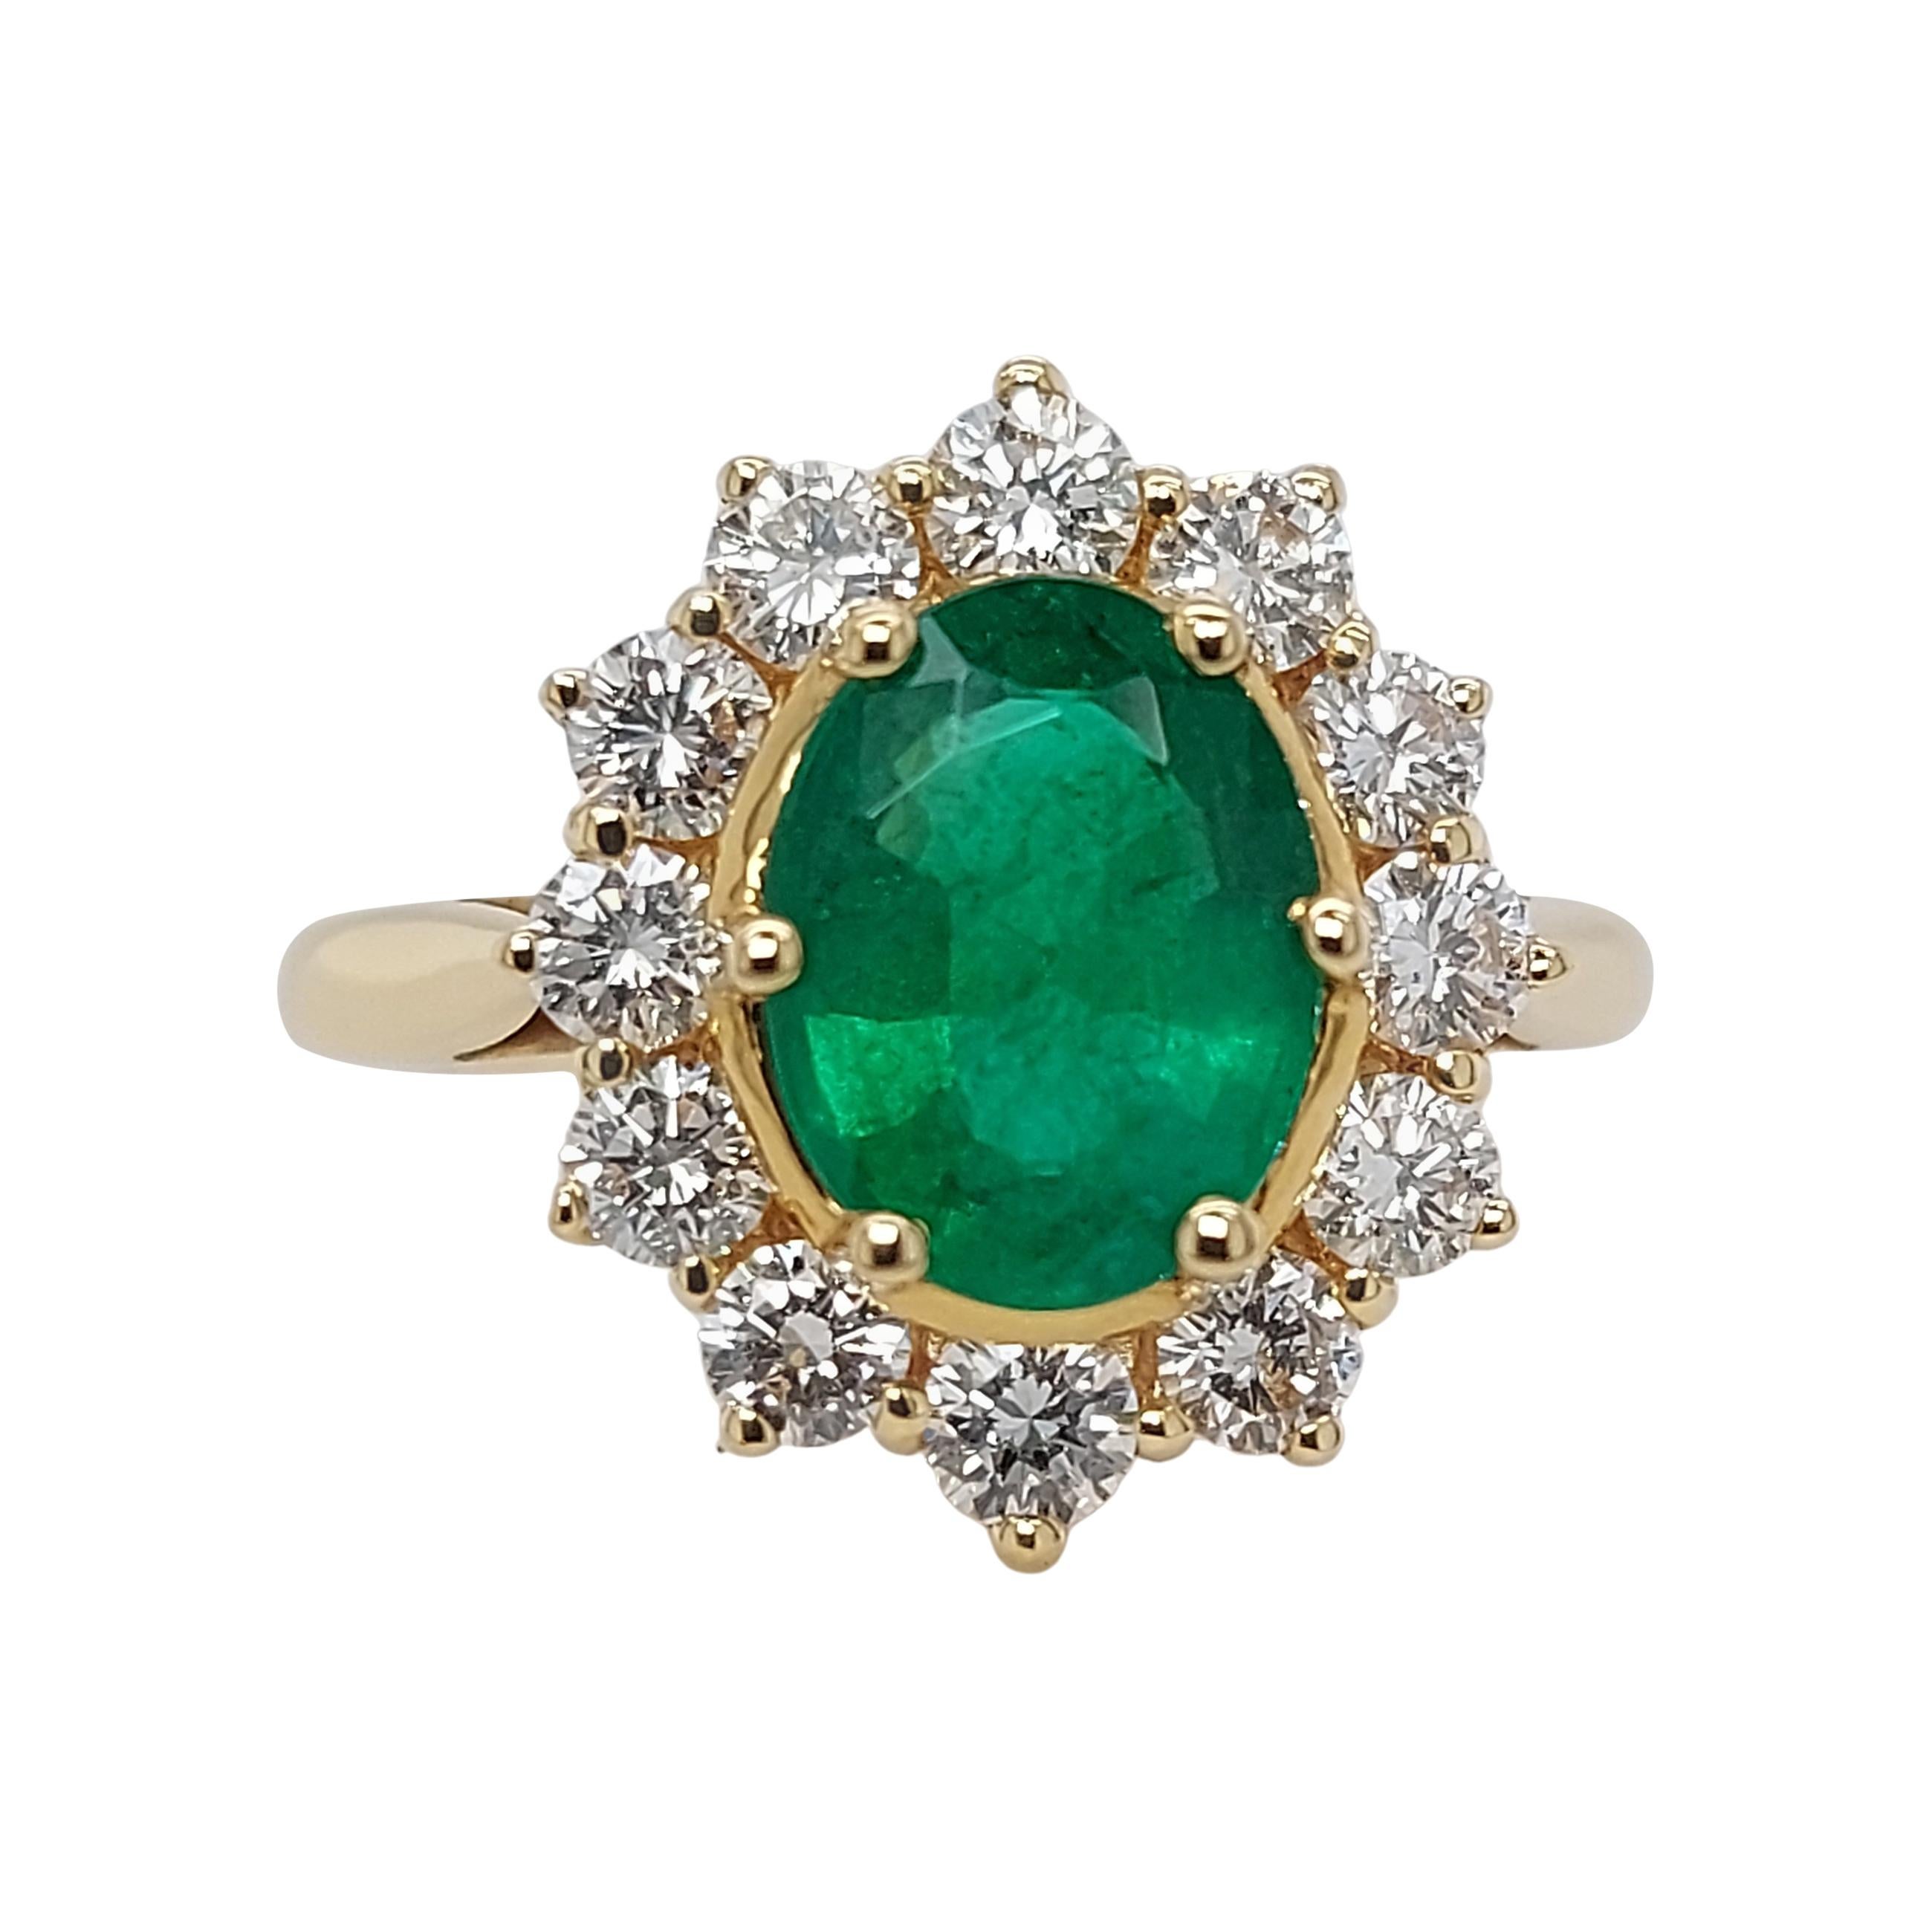 18kt Yellow Gold Ring with 1.75ct Emerald and 1.20ct Diamonds